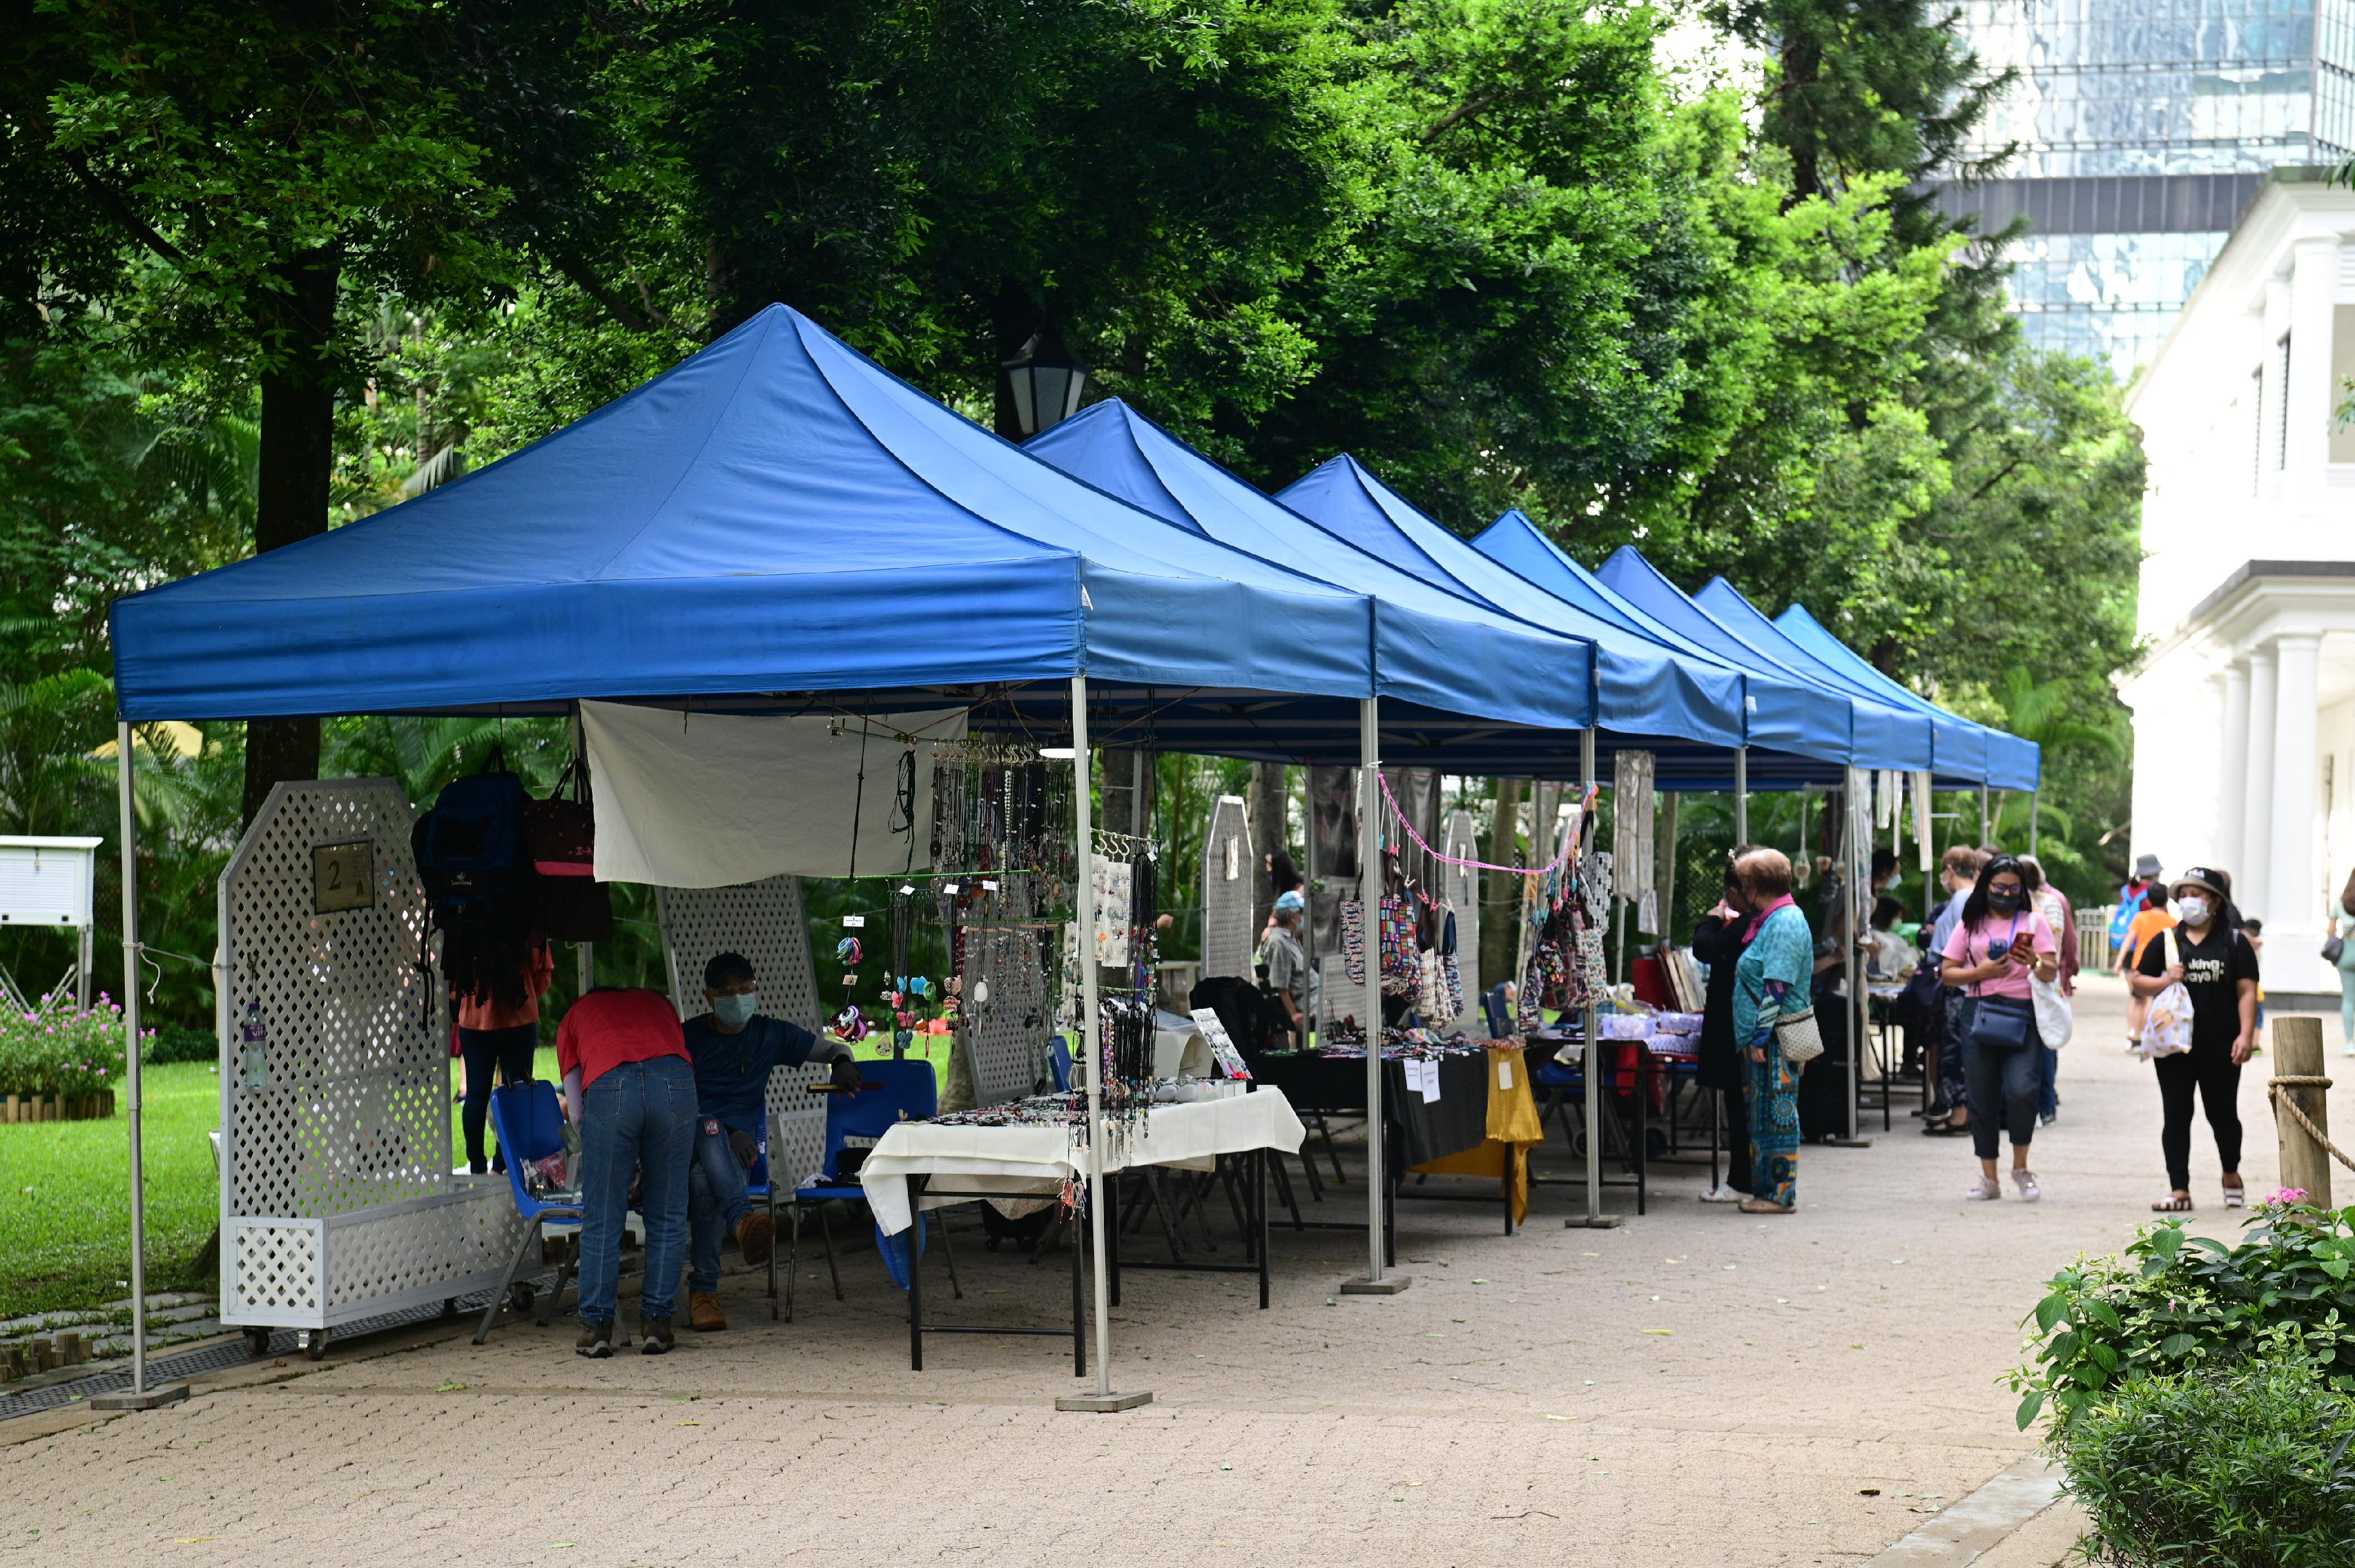 The Leisure and Cultural Services Department invites members of the public to visit the new phase of the Arts Corner at Hong Kong Park on Saturdays, Sundays and public holidays from January 1 to December 31 next year. The Arts Corner comprises 10 stalls displaying and selling various kinds of handicrafts and artistic works such as fabric crafts, floral artworks and ornaments, as well as providing cultural and arts services including painting, portrait sketching and calligraphy.